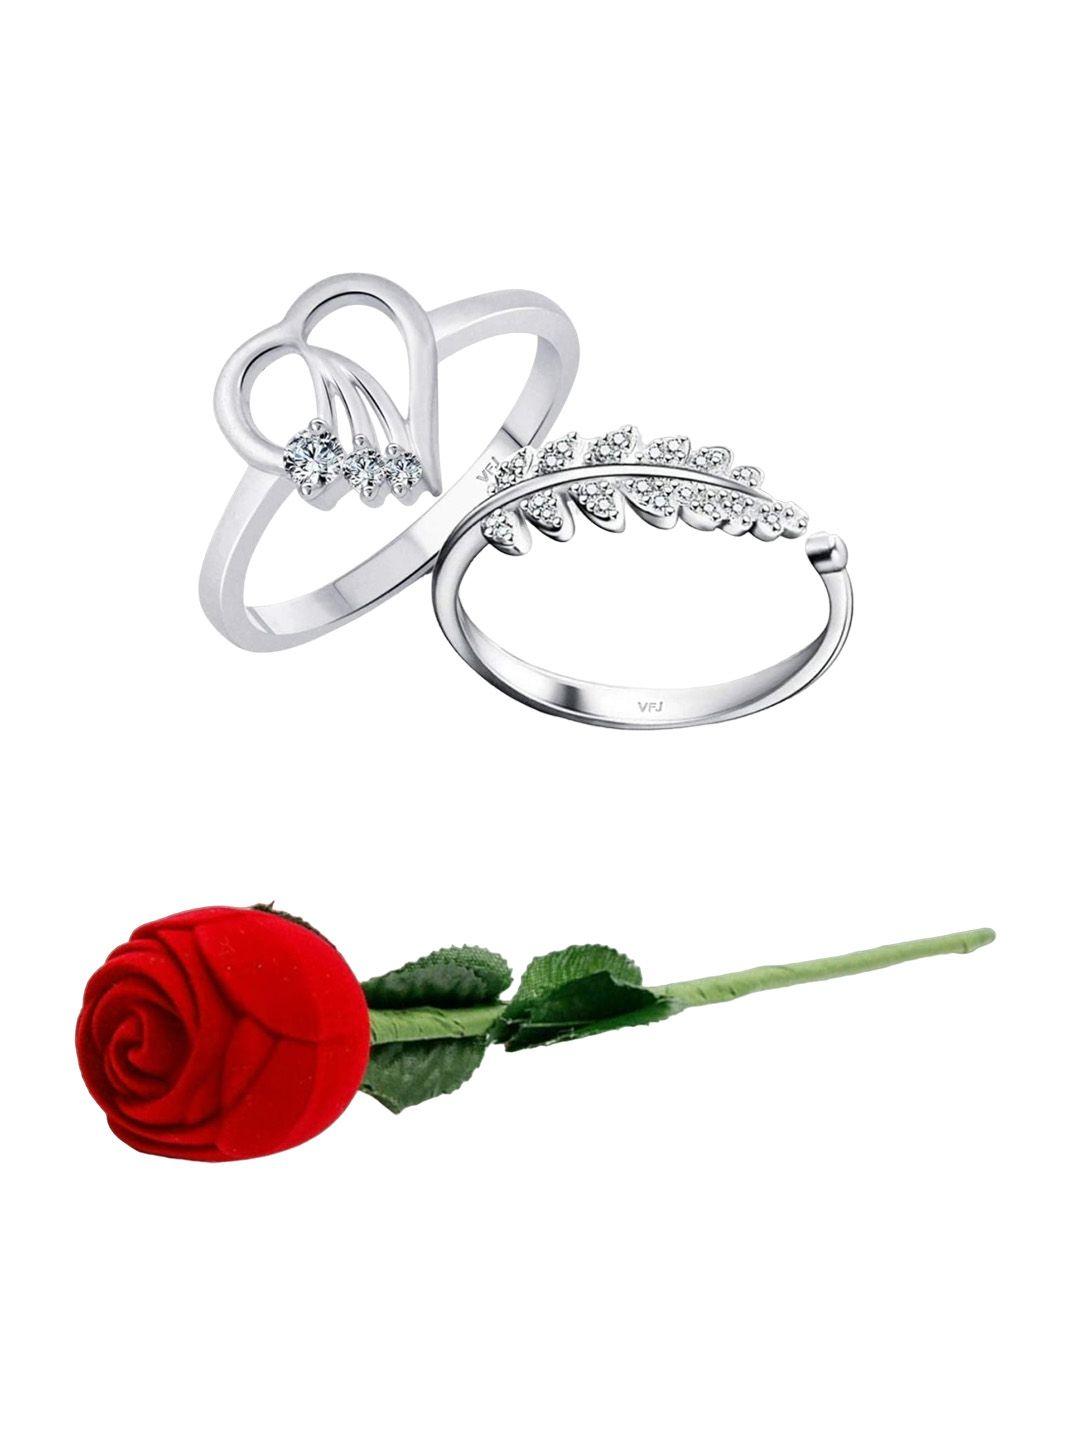 vighnaharta set of 2 rhodium-plated cz-stone studded finger ring with rose box